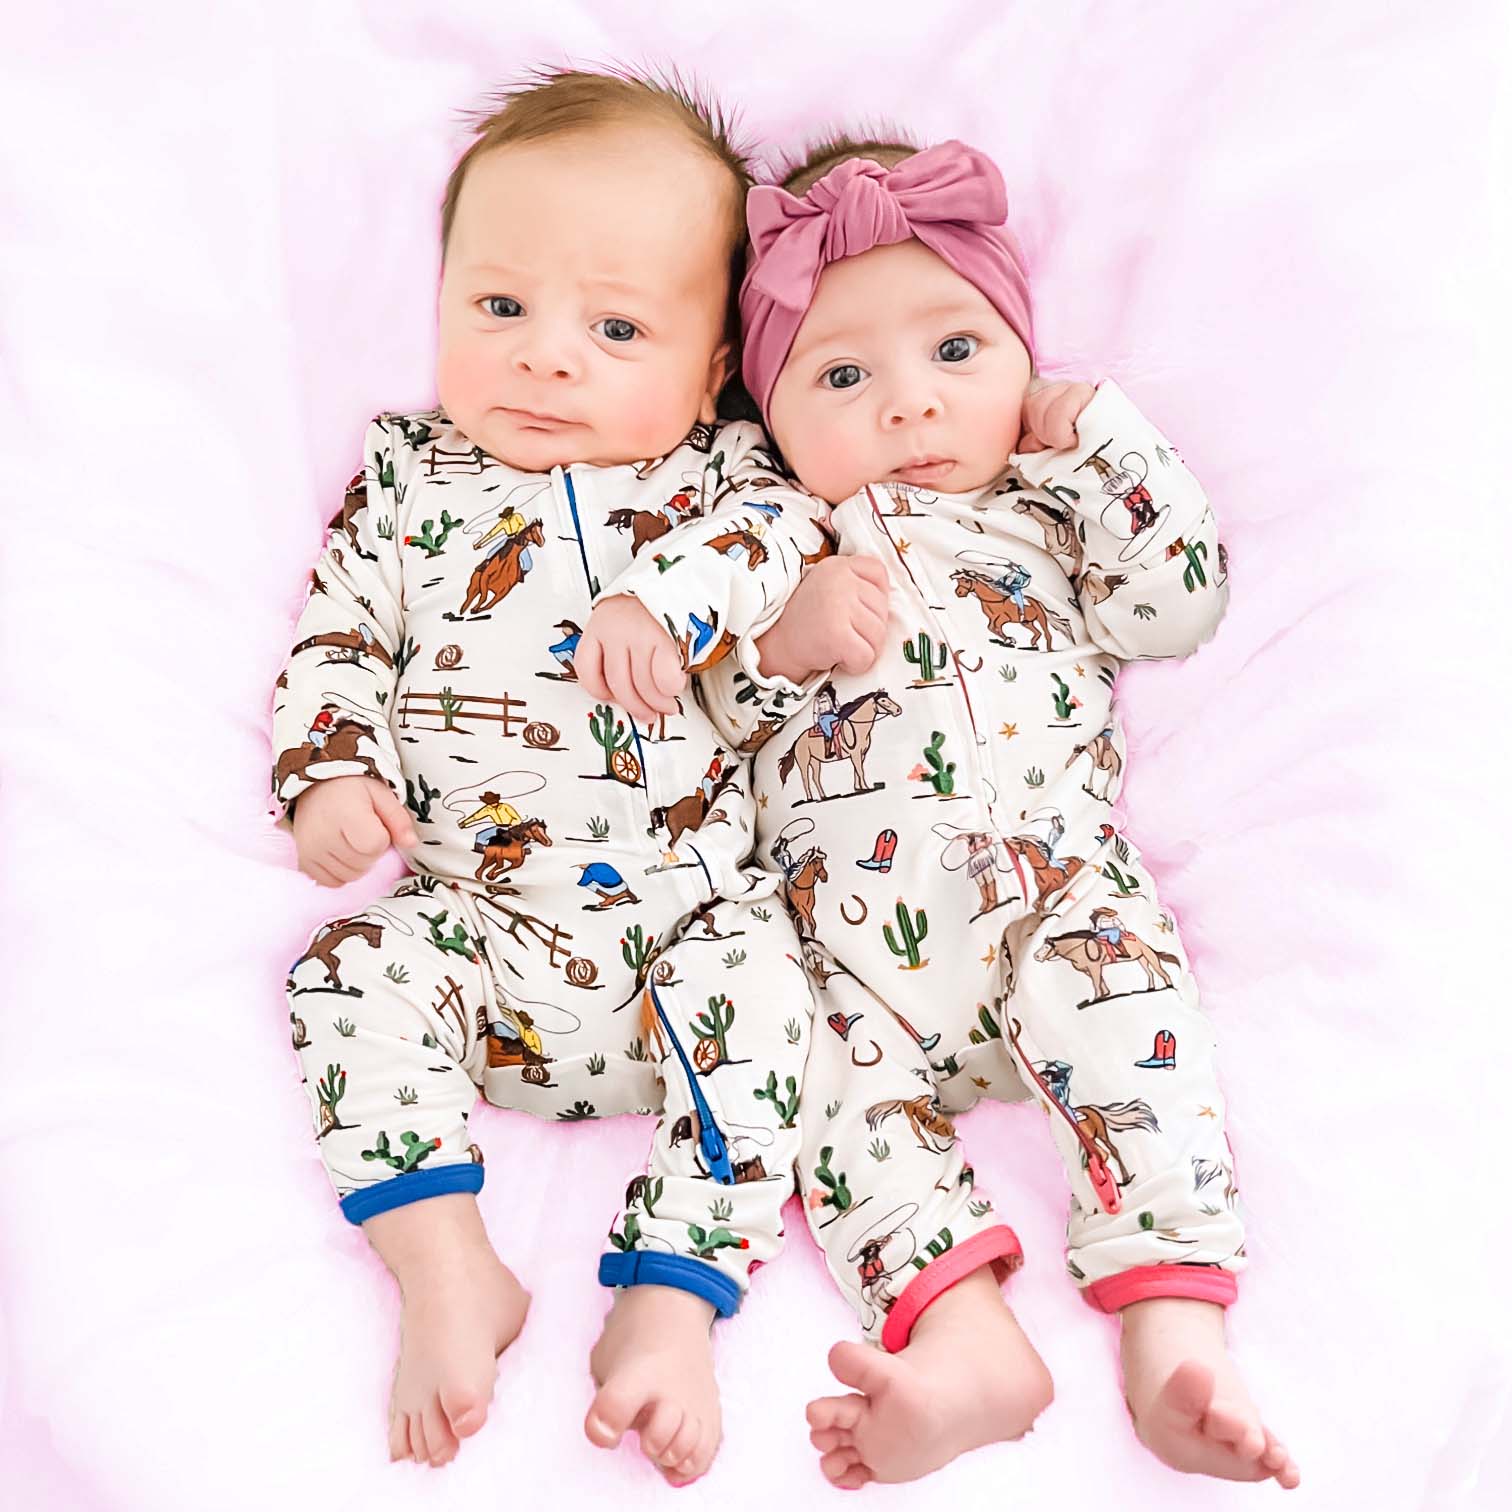 Baby Clothing Essentials: Must-Have Items for Every New Parent - Free Birdees